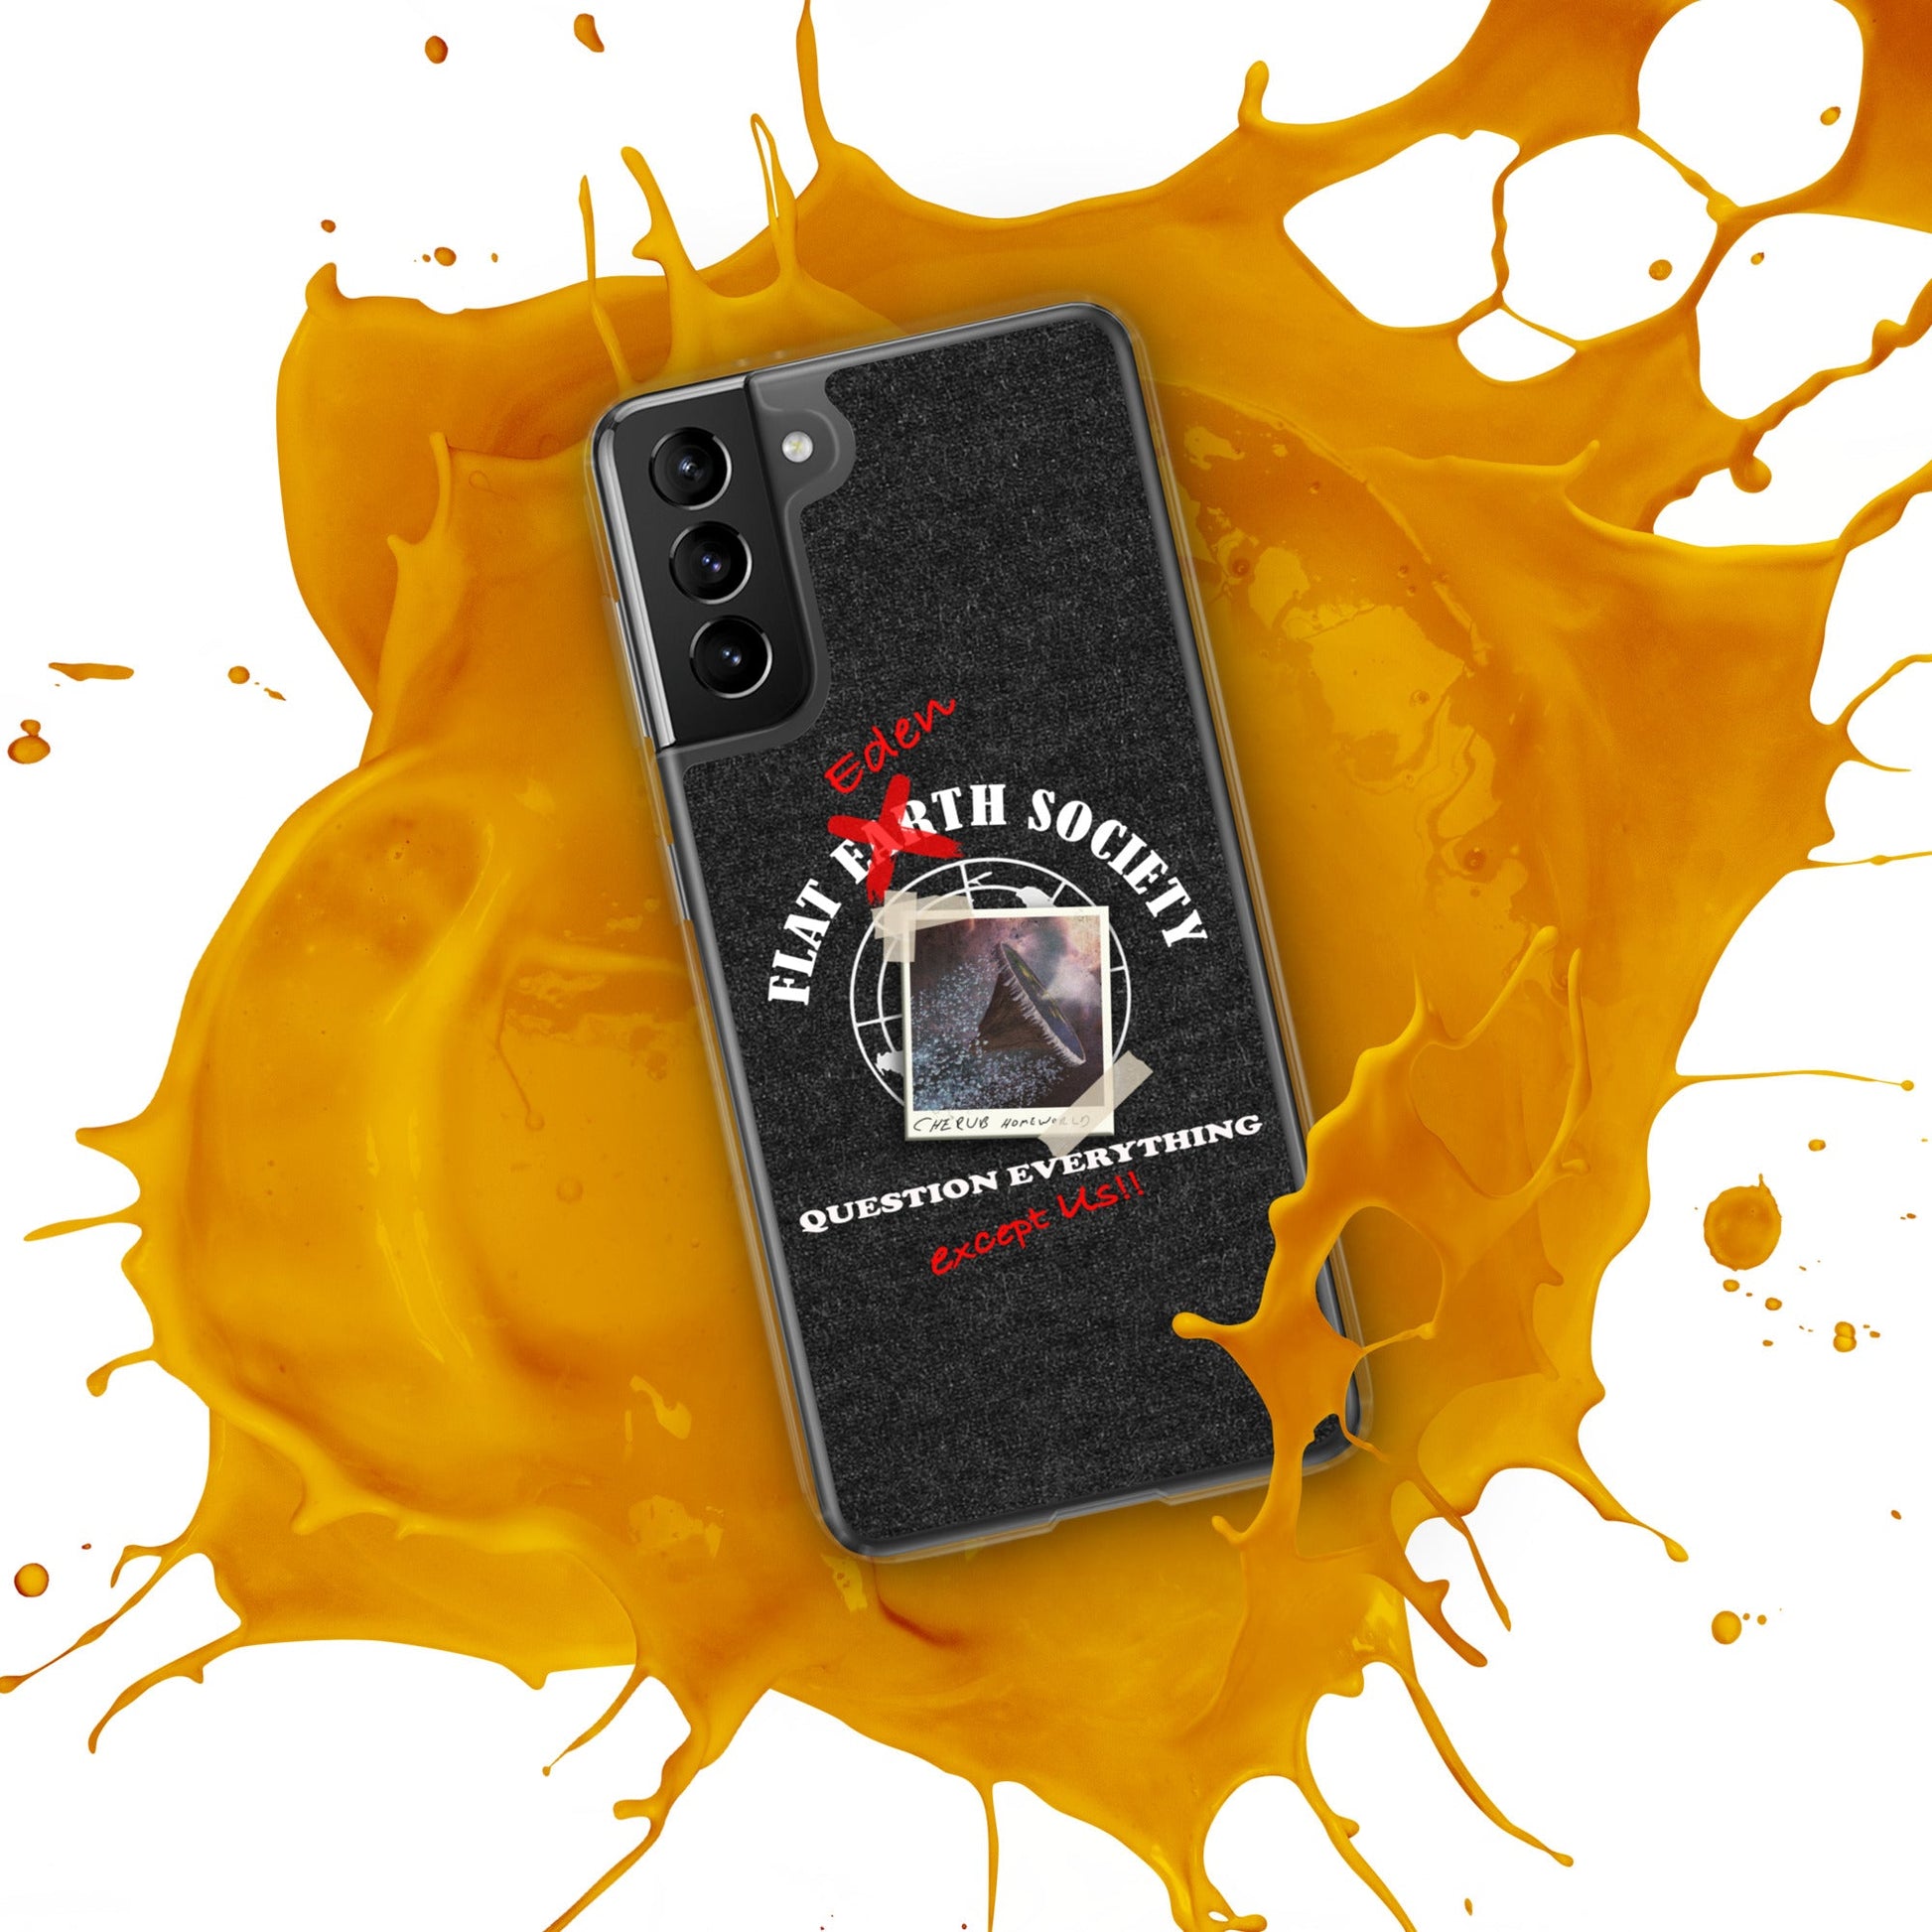 Samsung | Intergalactic Space Force 2 | Flat Eden Society - Spectral Ink Shop - Mobile Phone Cases -7213222_12027